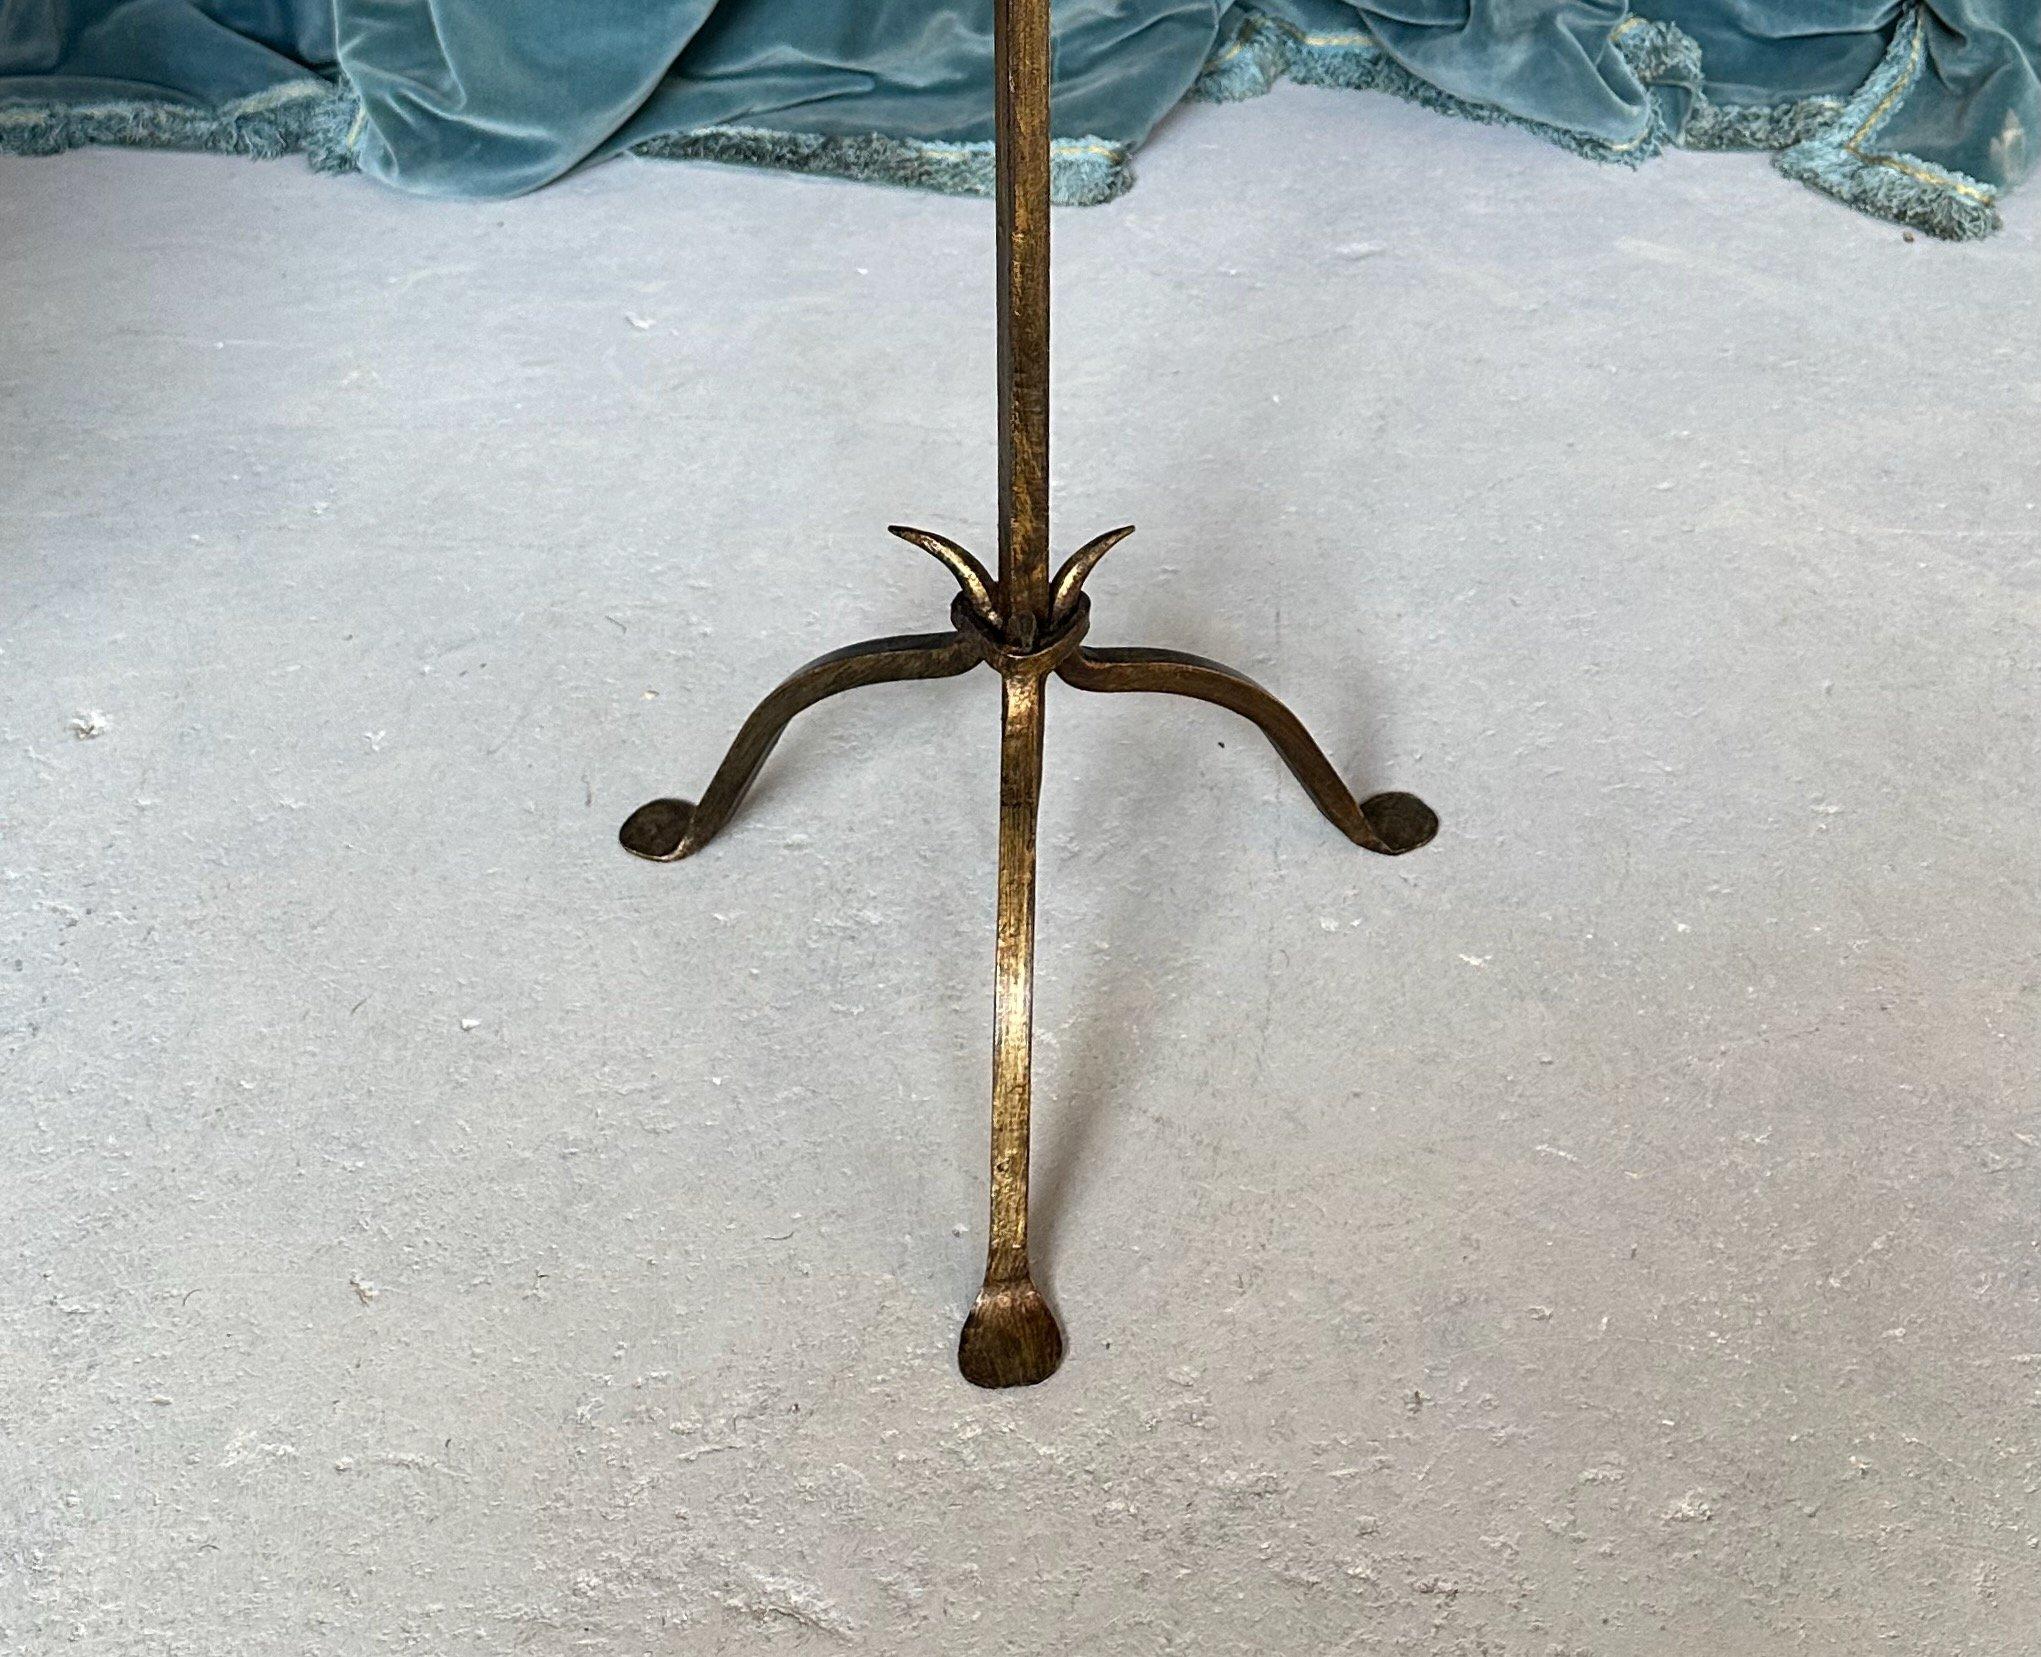 Small Spanish Gilt Iron Drinks Table with Pointed Stem In Good Condition For Sale In Buchanan, NY